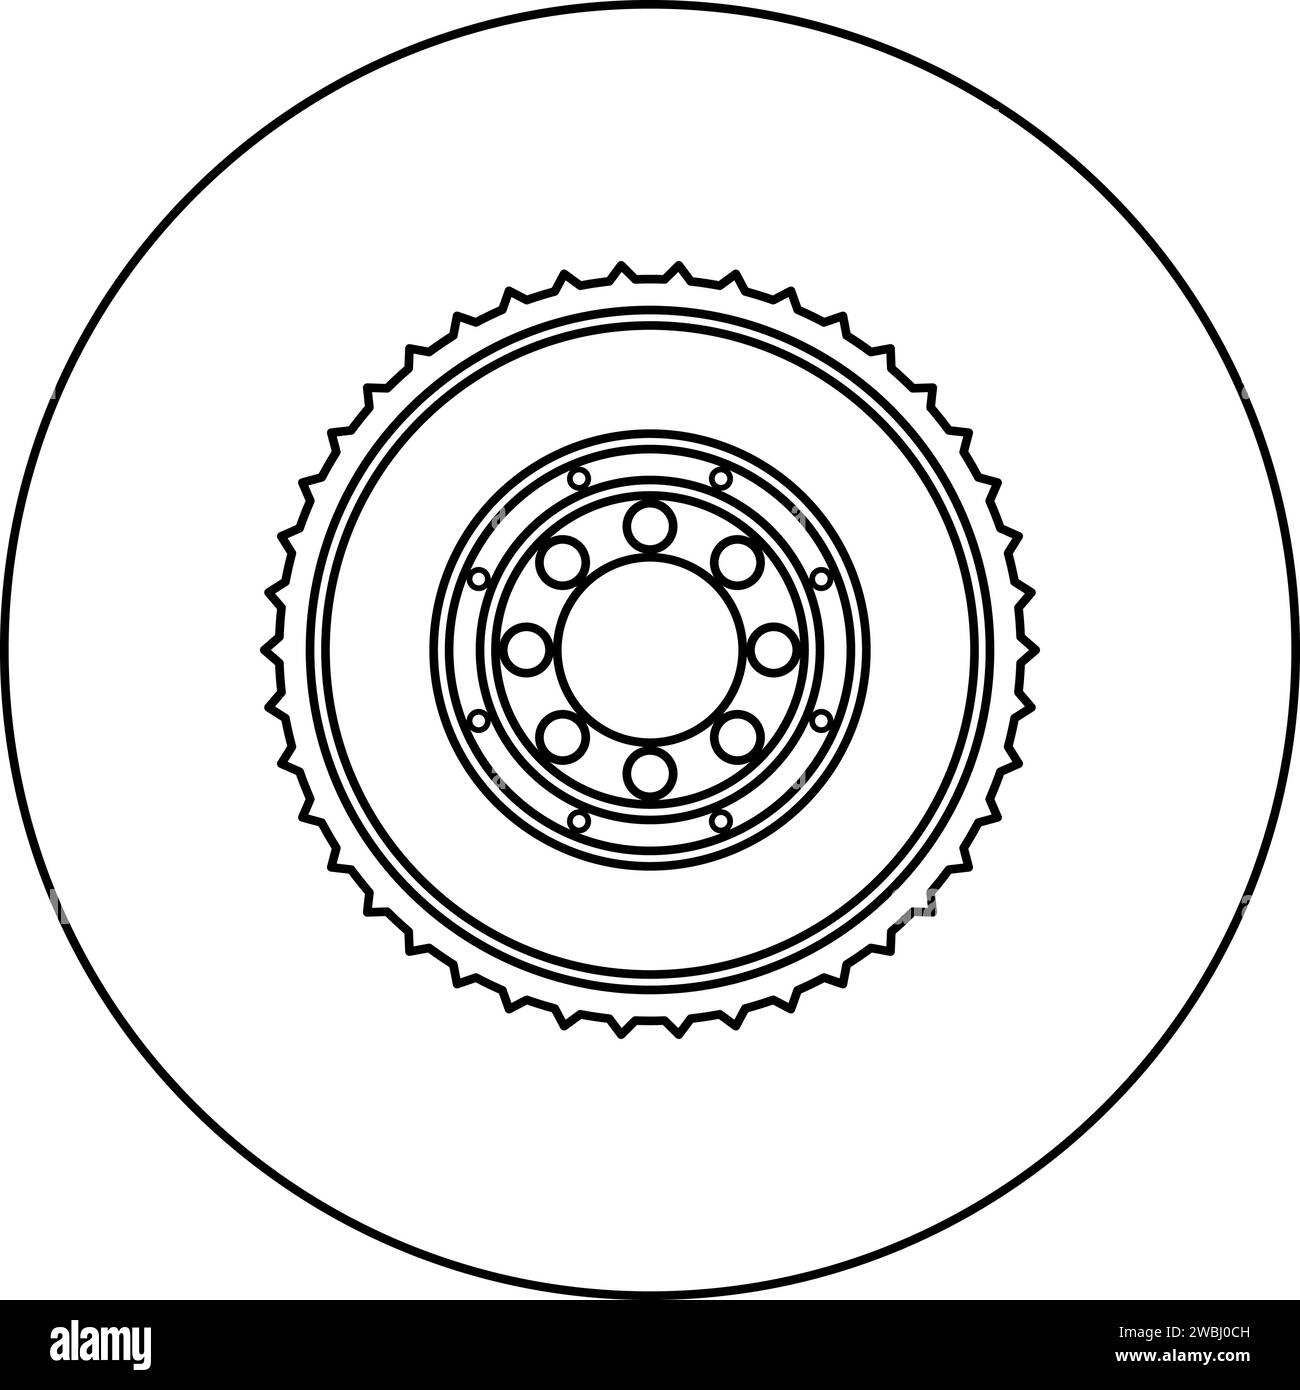 Car clutch flywheel cohesion transmission auto part plate kit repair service icon in circle round black color vector illustration image outline Stock Vector